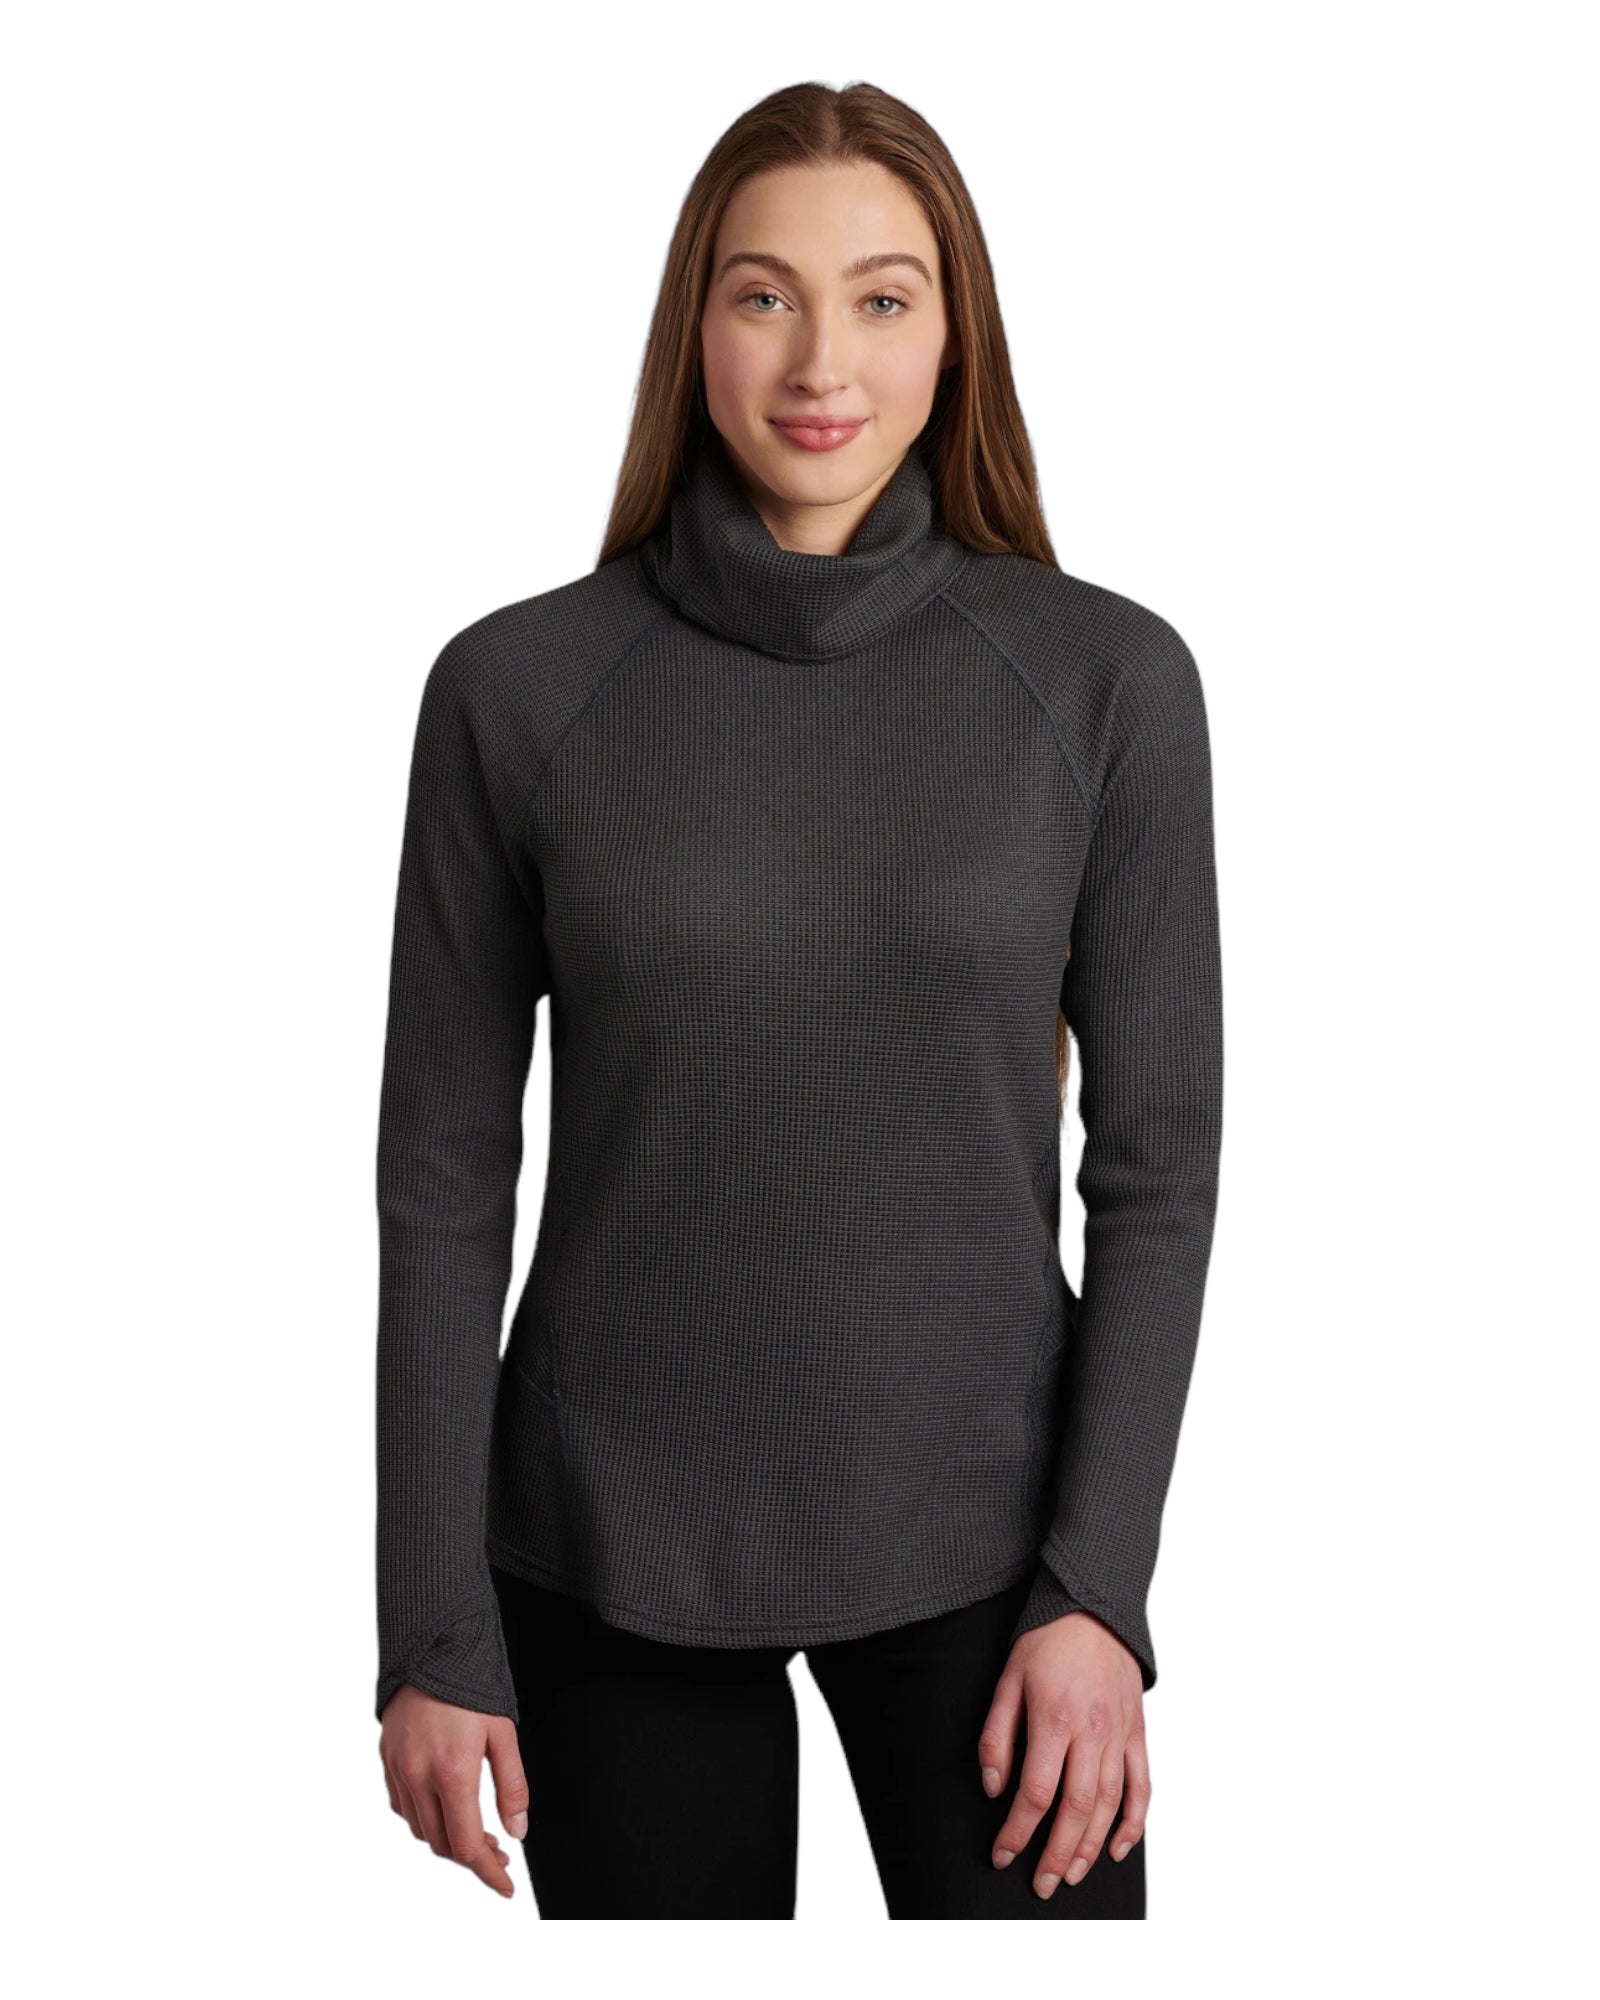 The PETRA TURTLENECK is perfect for chilly days and nights. With flattering design lines and stylish, directional fabrics, this turtleneck updates a classic look with a modern touch. 